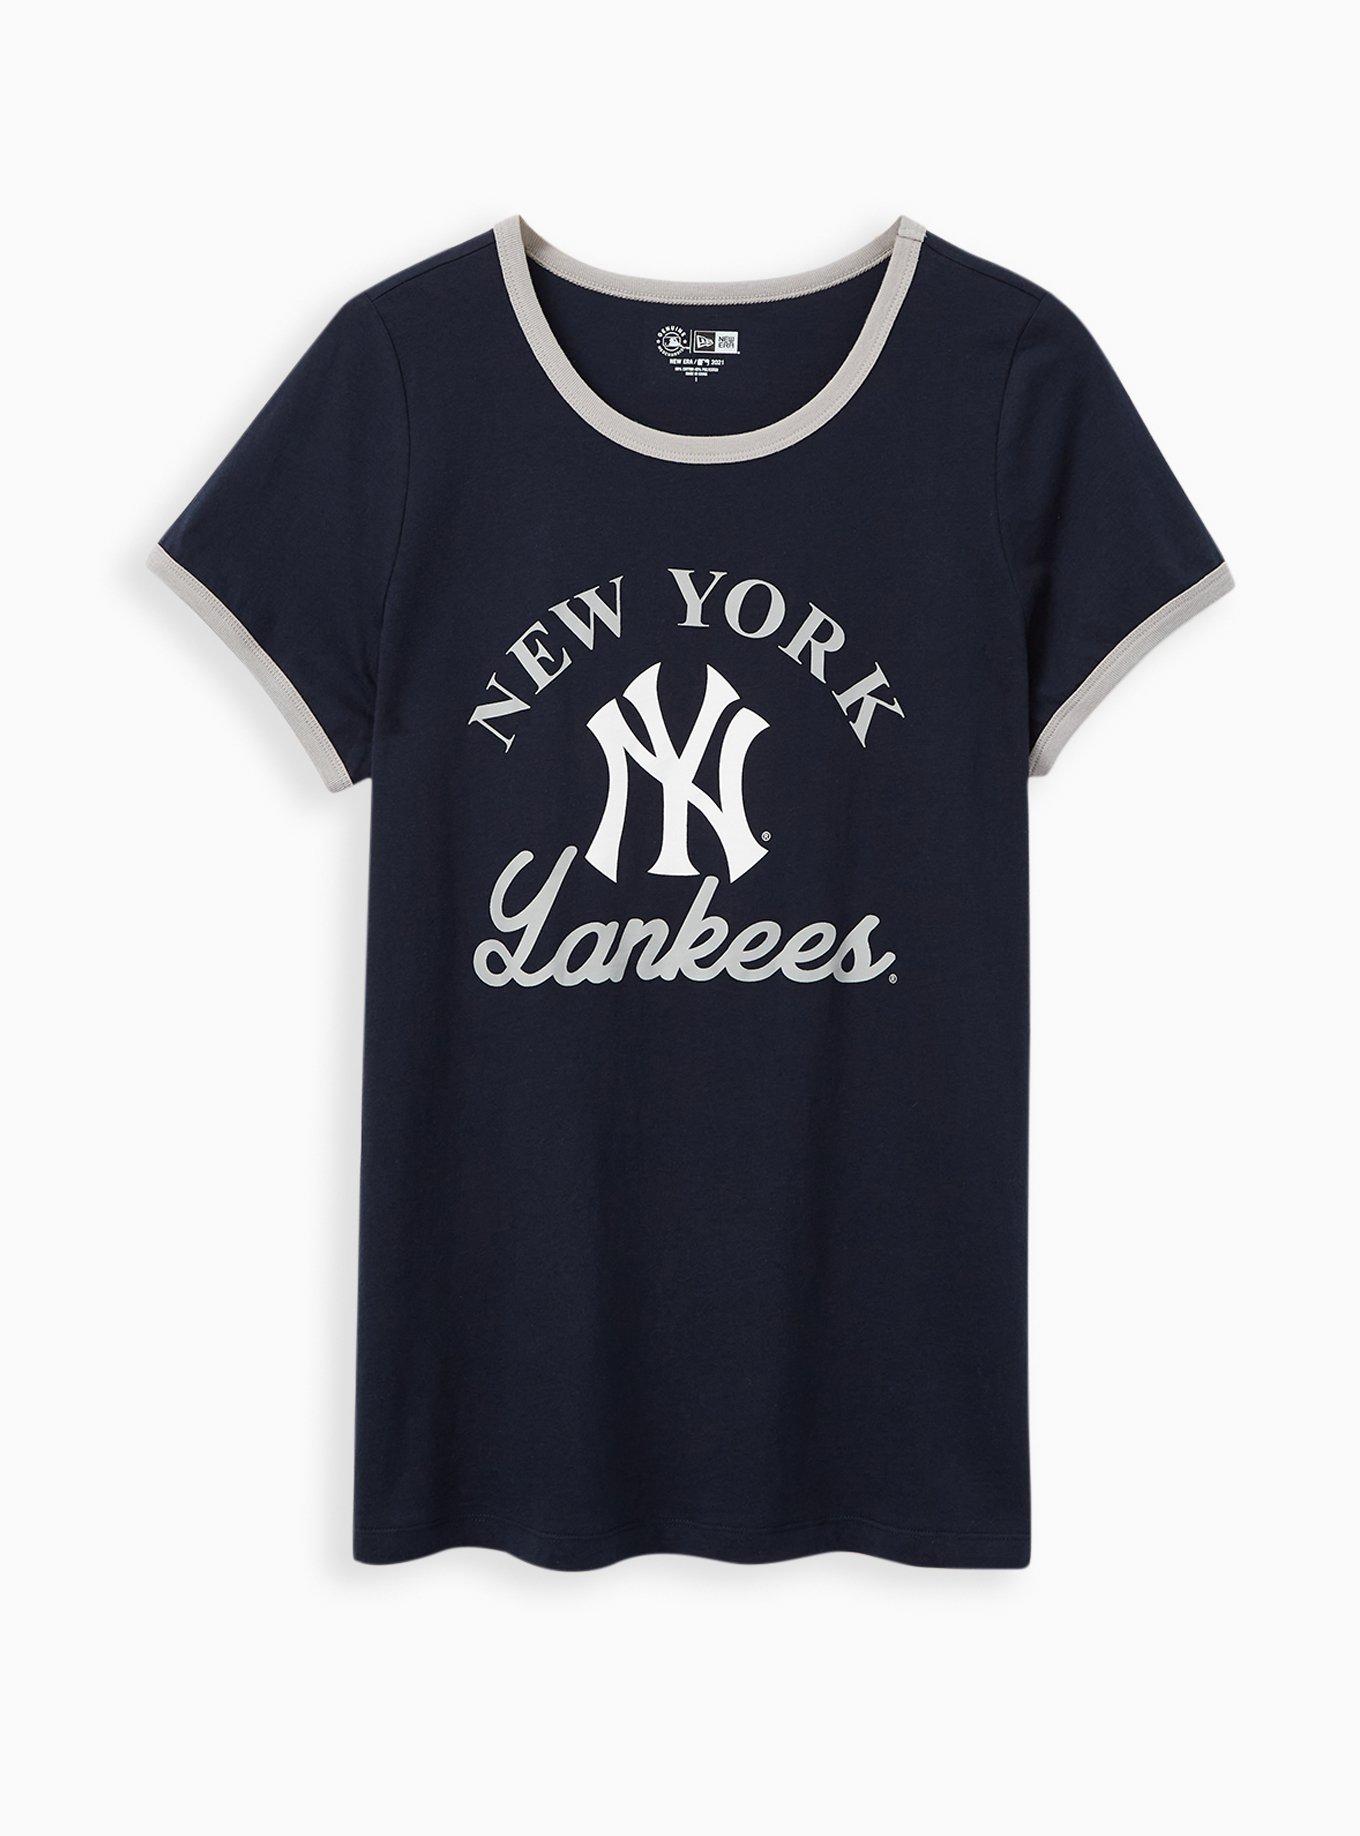 Plus Size - Classic Fit Ringer Tee - MLB New York Yankees Navy